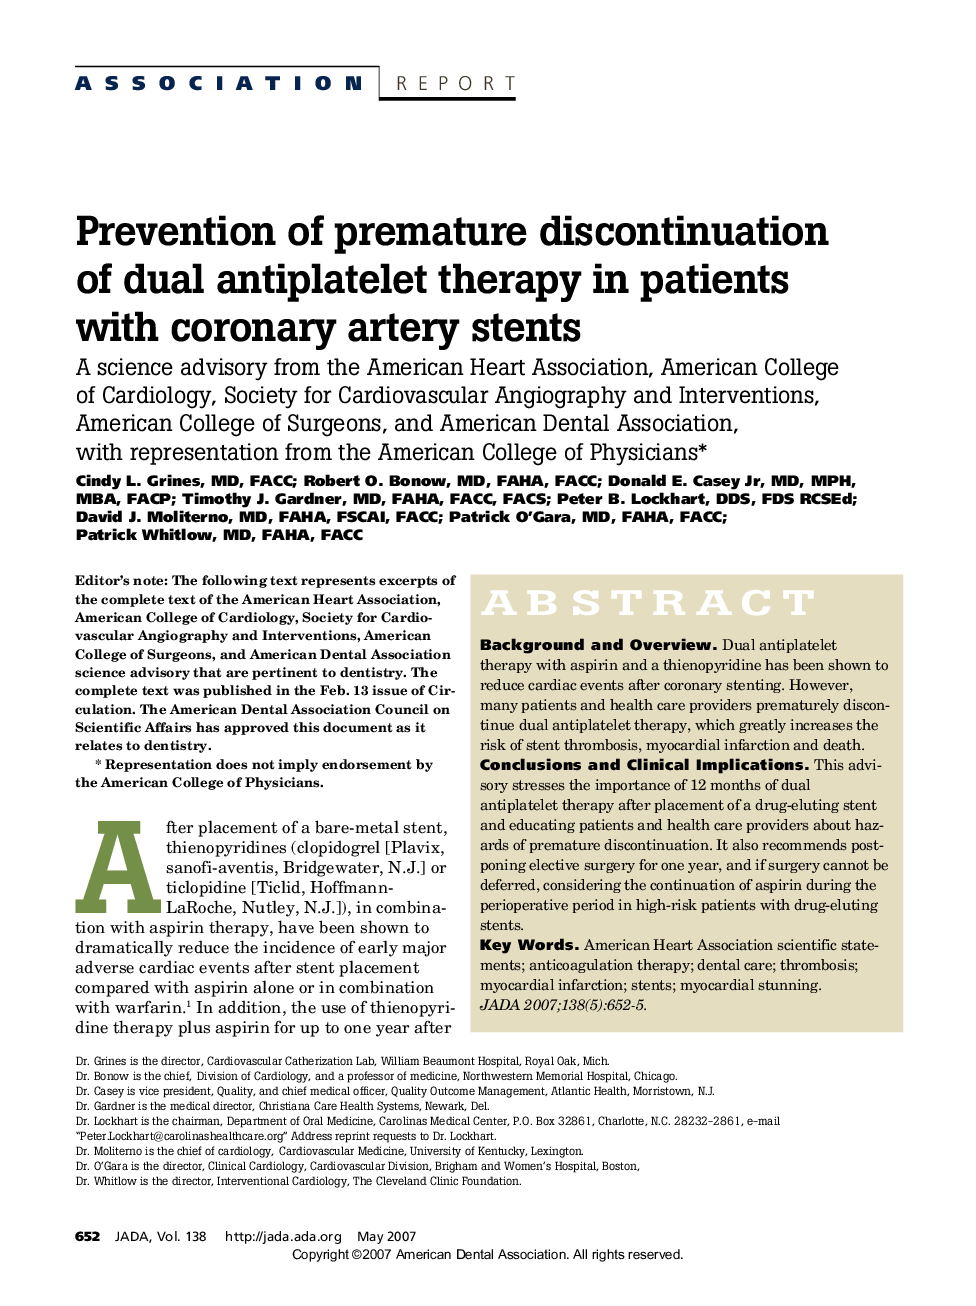 Prevention of premature discontinuation of dual antiplatelet therapy in patients with coronary artery stents